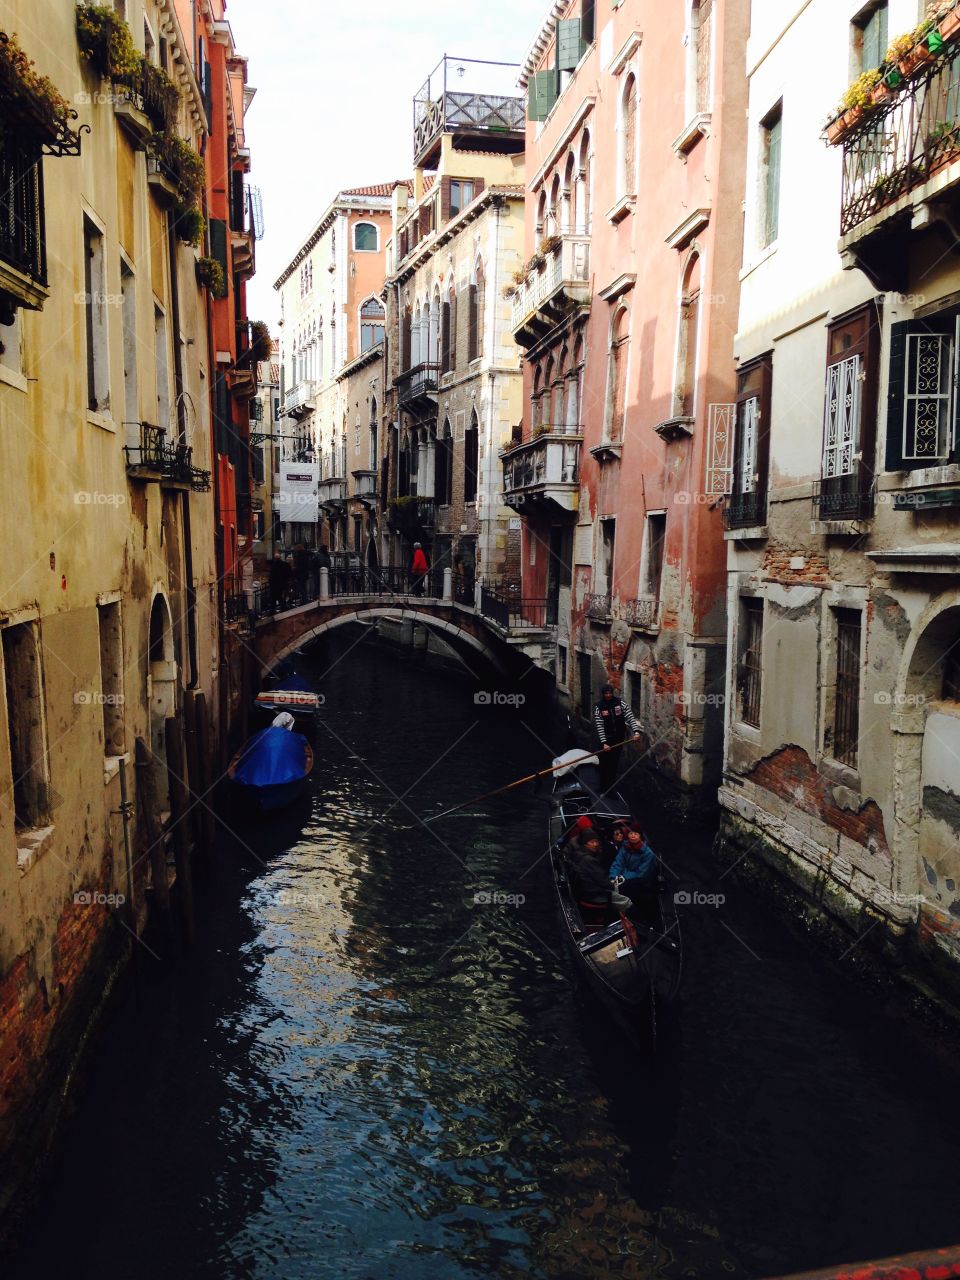 Venice Canal. Venice, Italy, canal, bridge, water, romantic, history, boats, gondola, architecture, relaxing